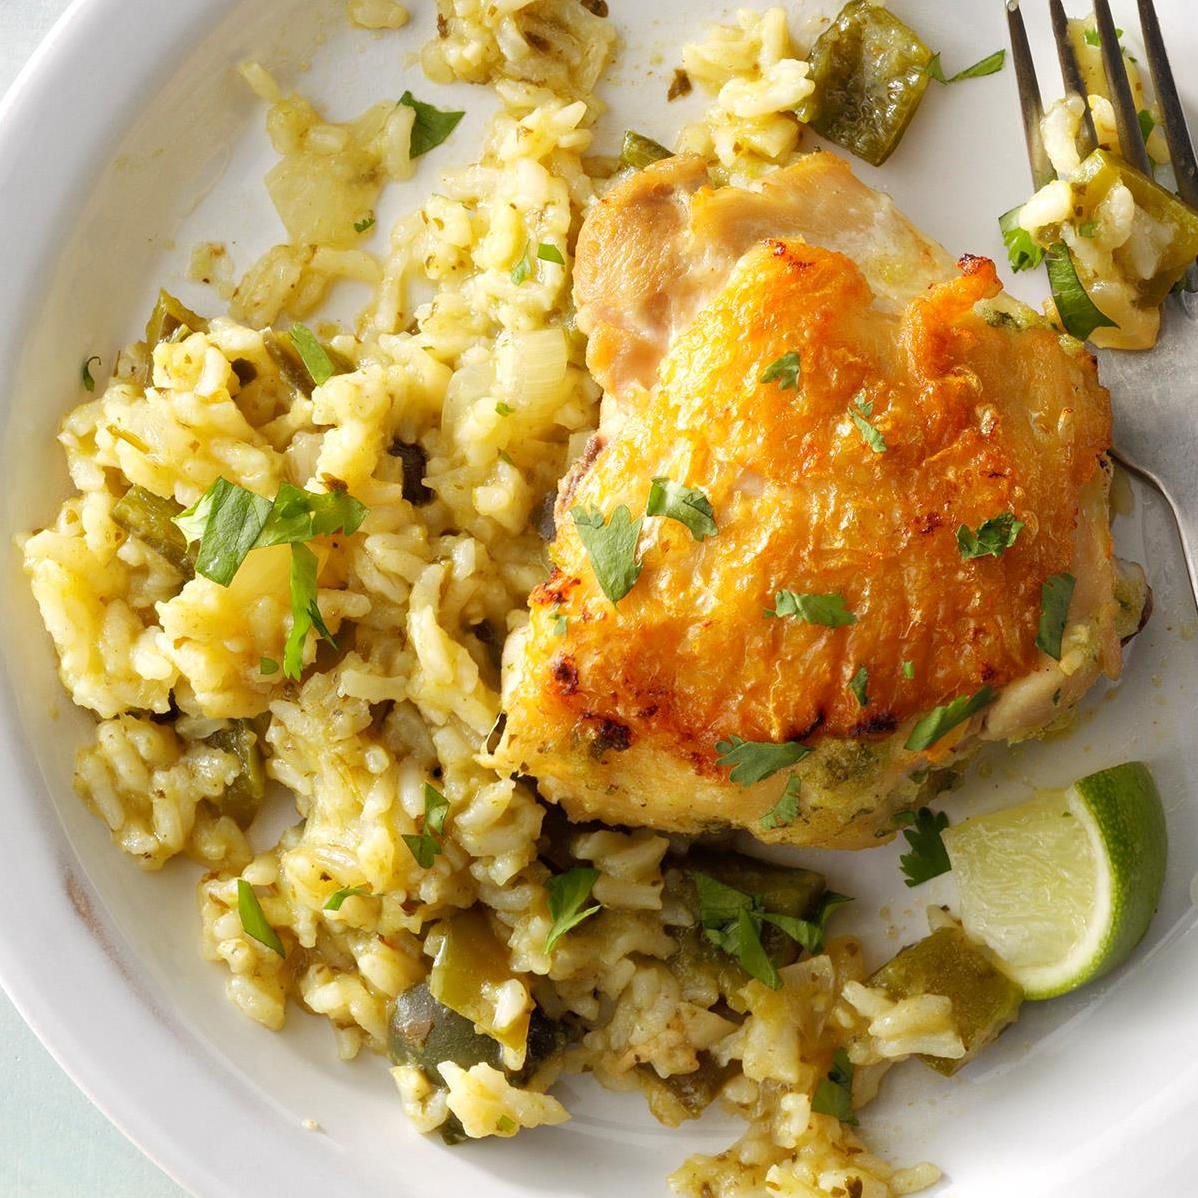  Take a culinary trip to South America with this authentic Arroz con Pollo with Salsa Verde recipe.